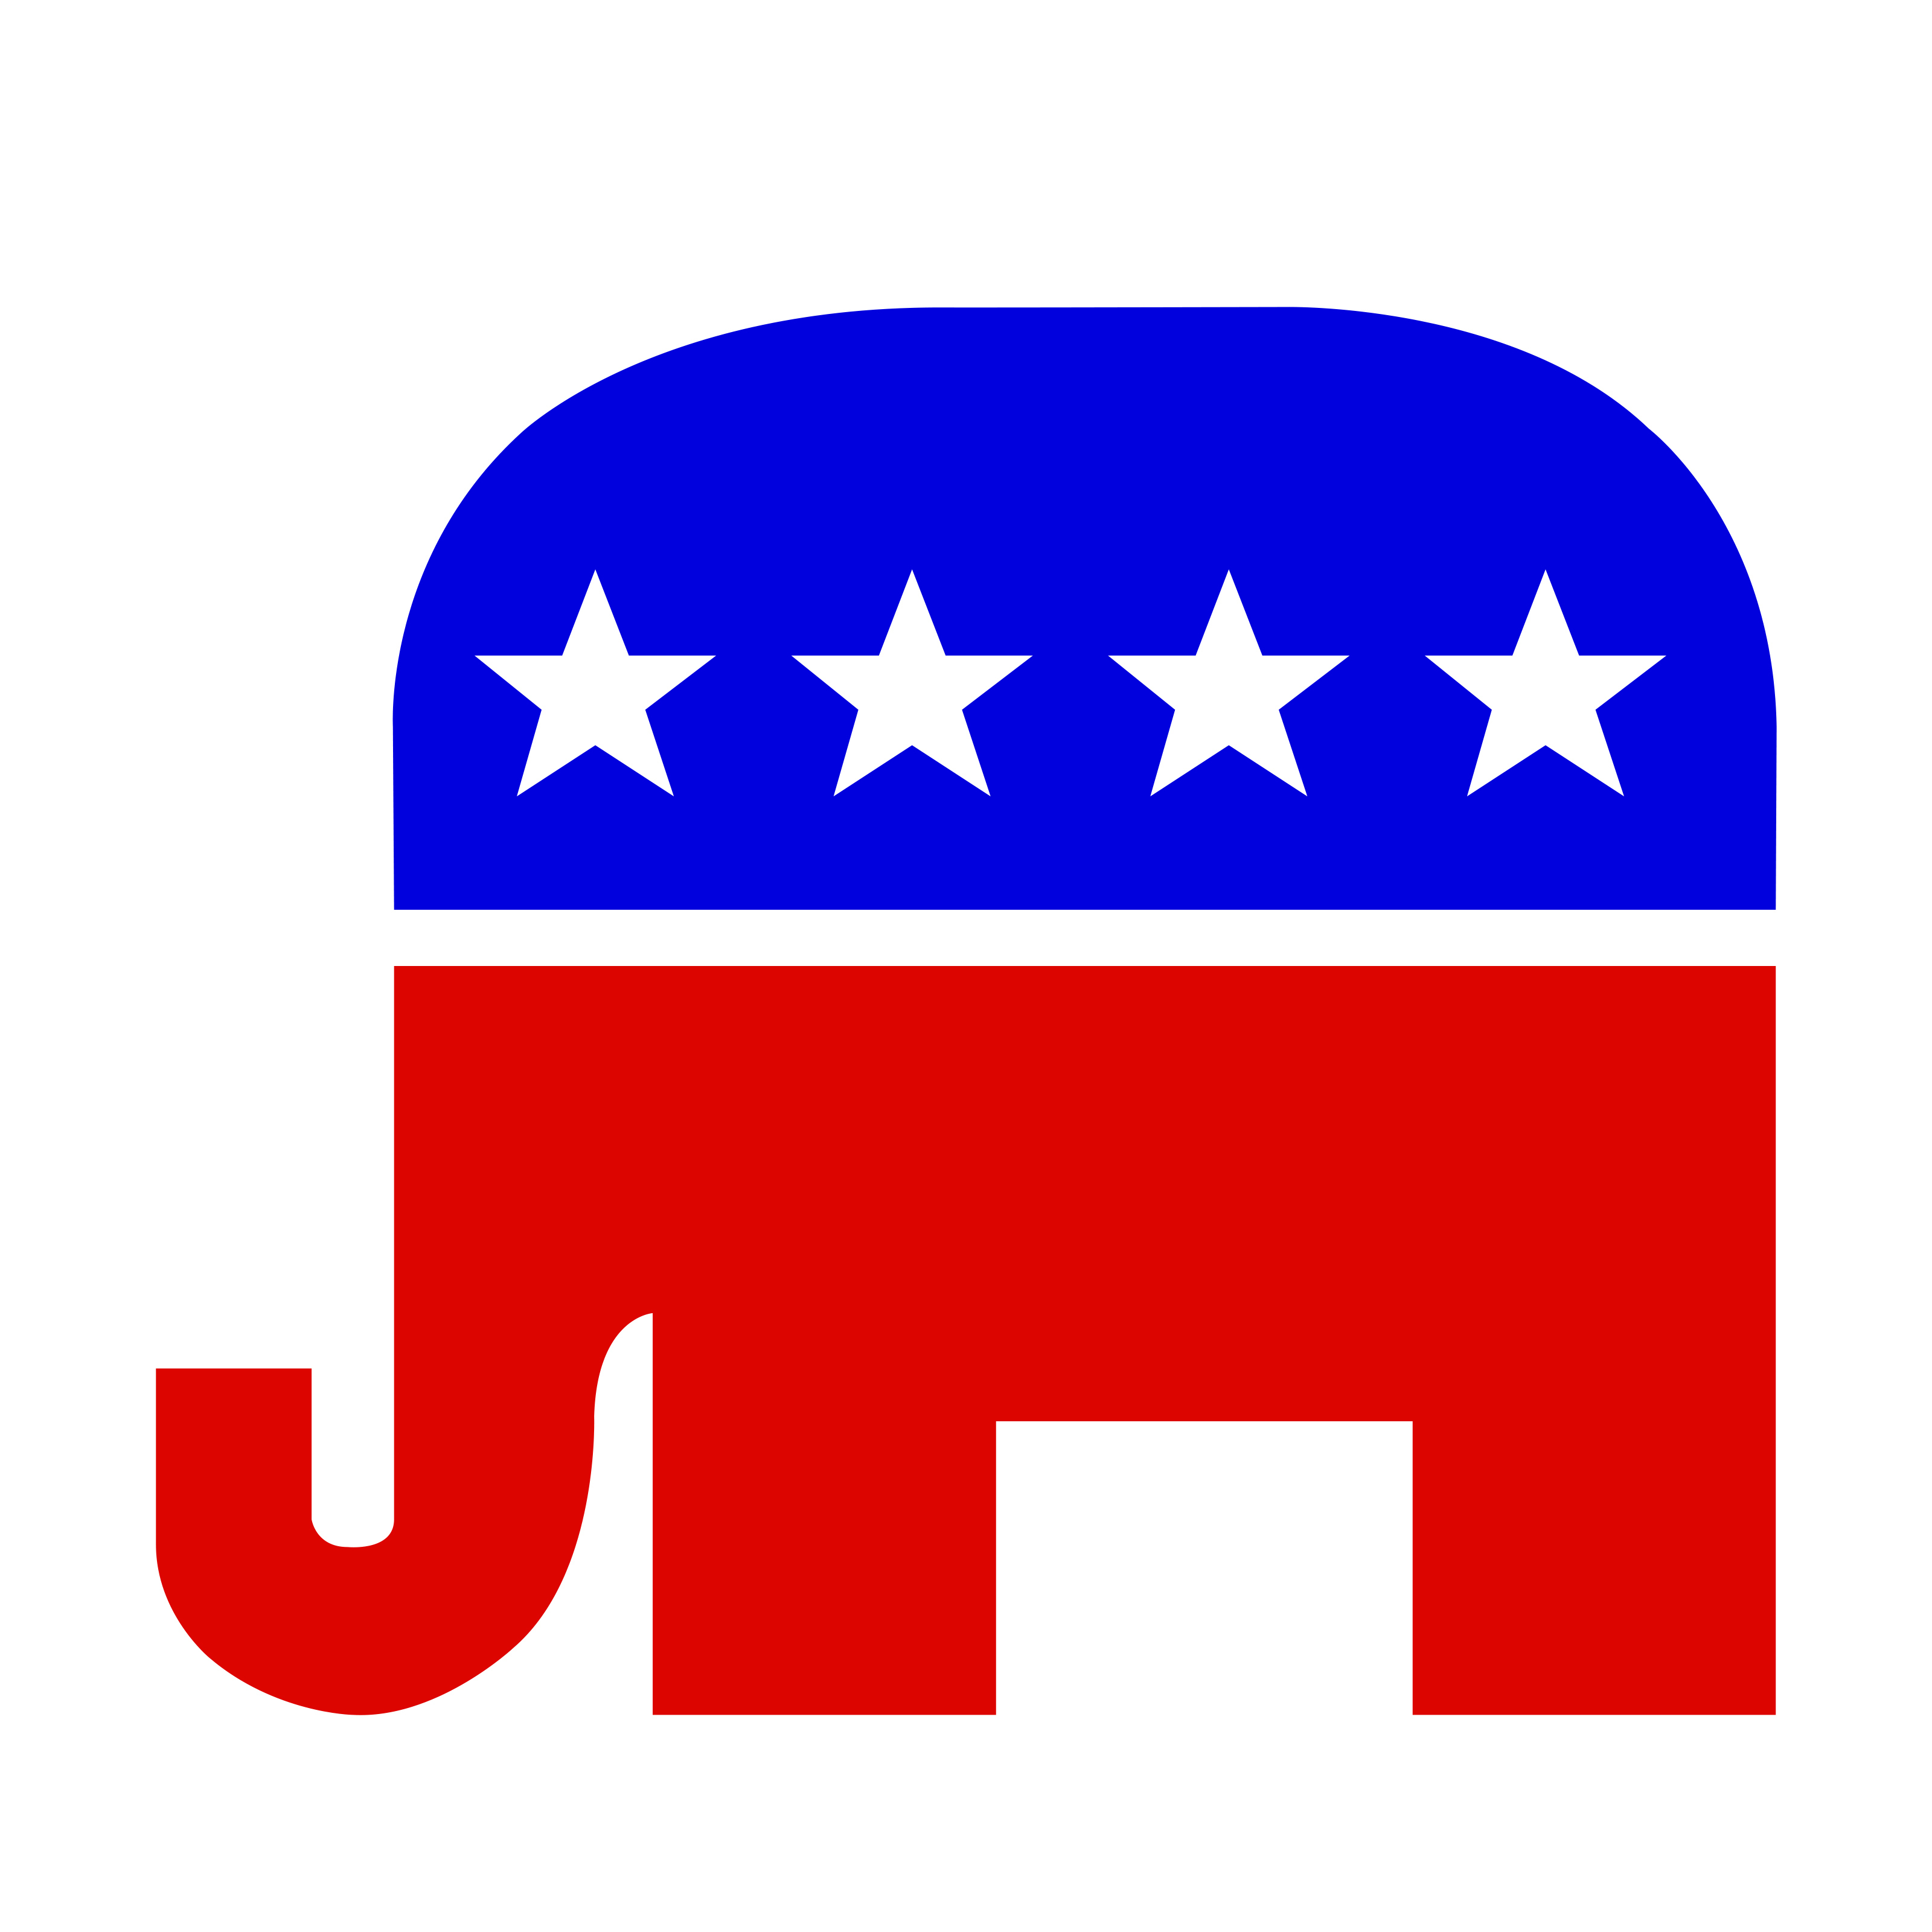 The New GOP – The Moderate Voice